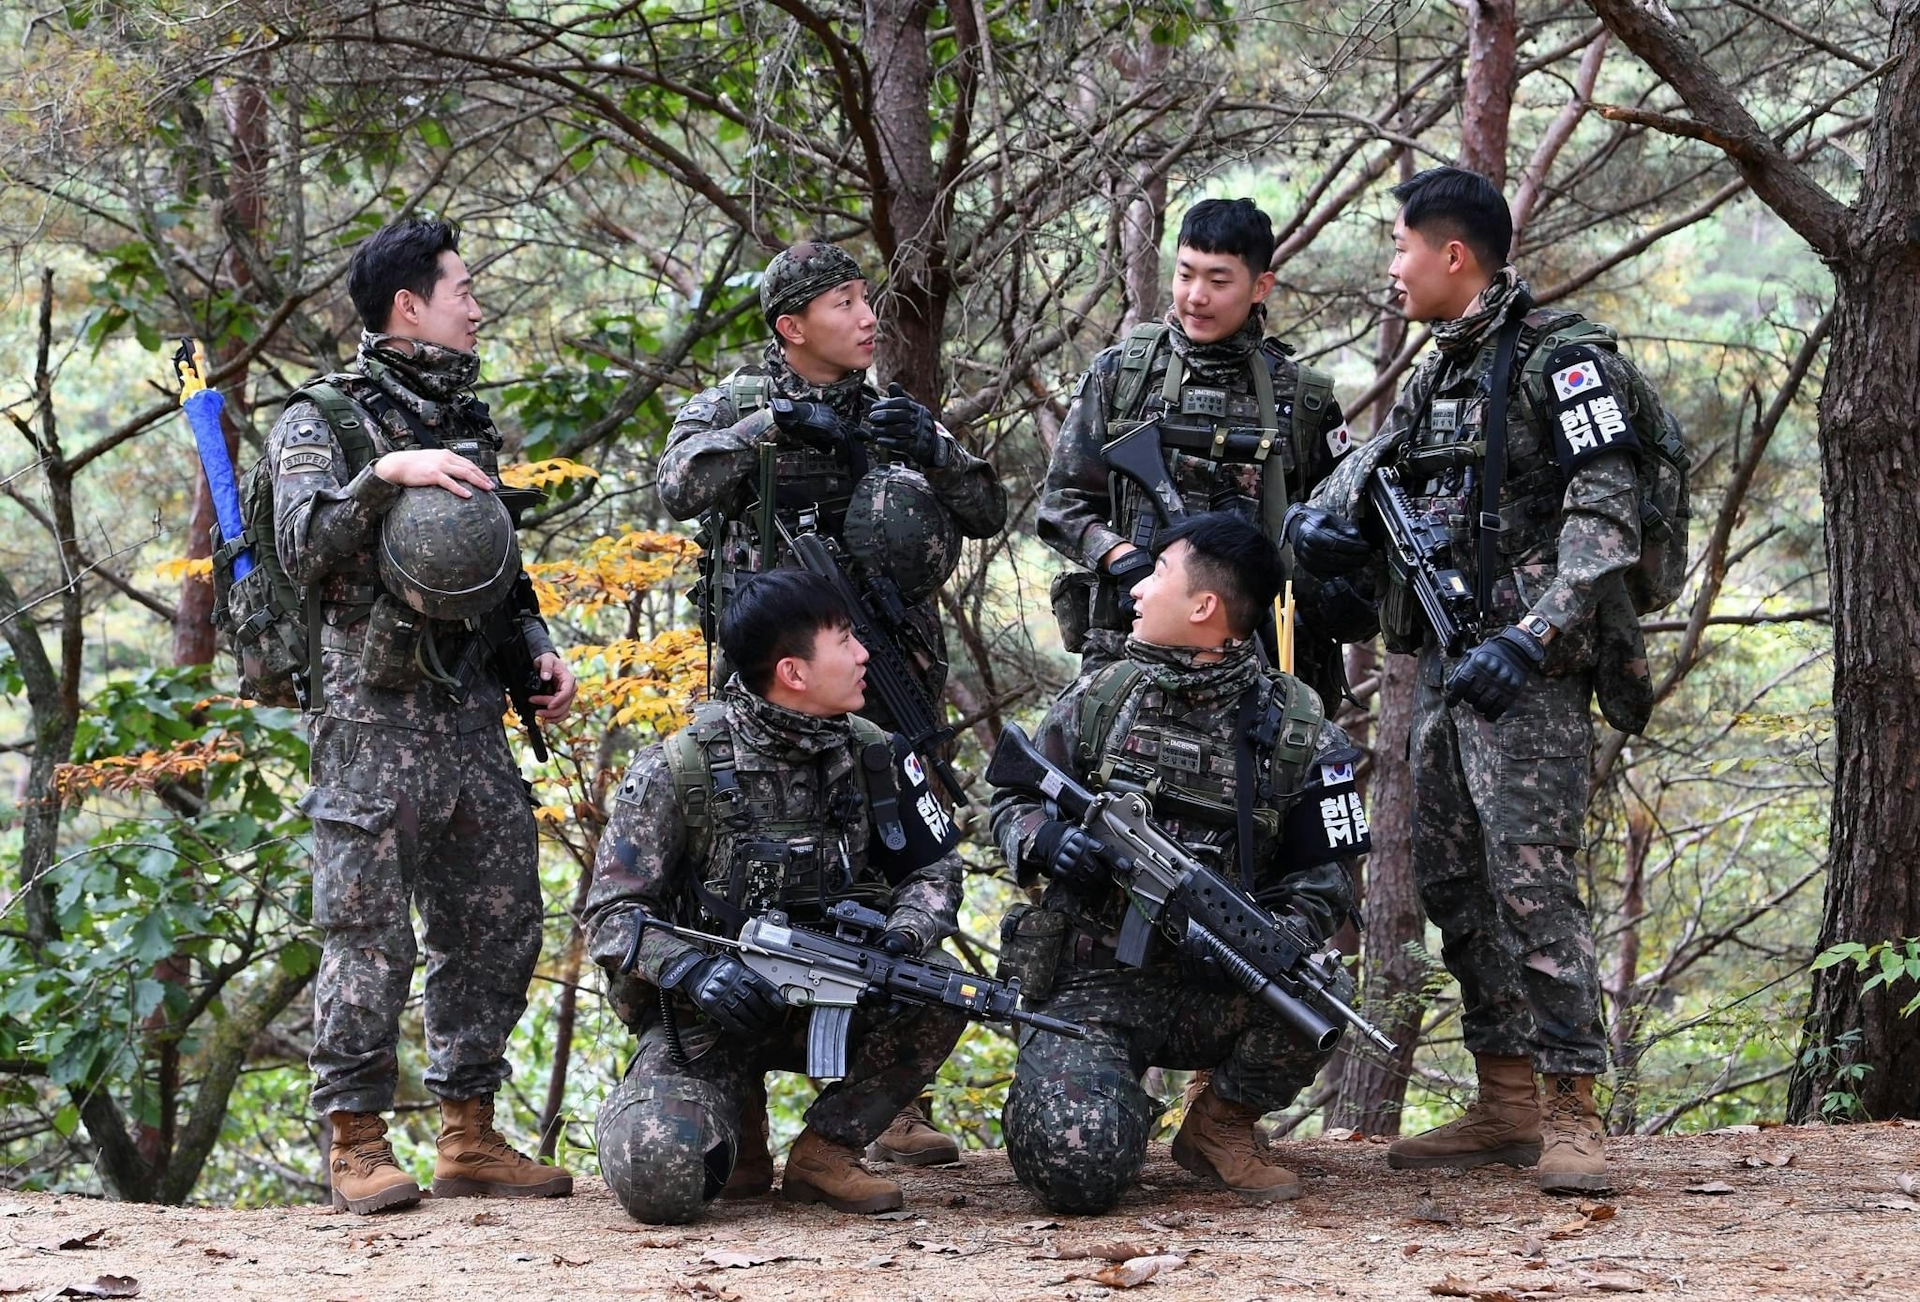 A Young Soldier and His Watch: the Korean Male Rite of Passage